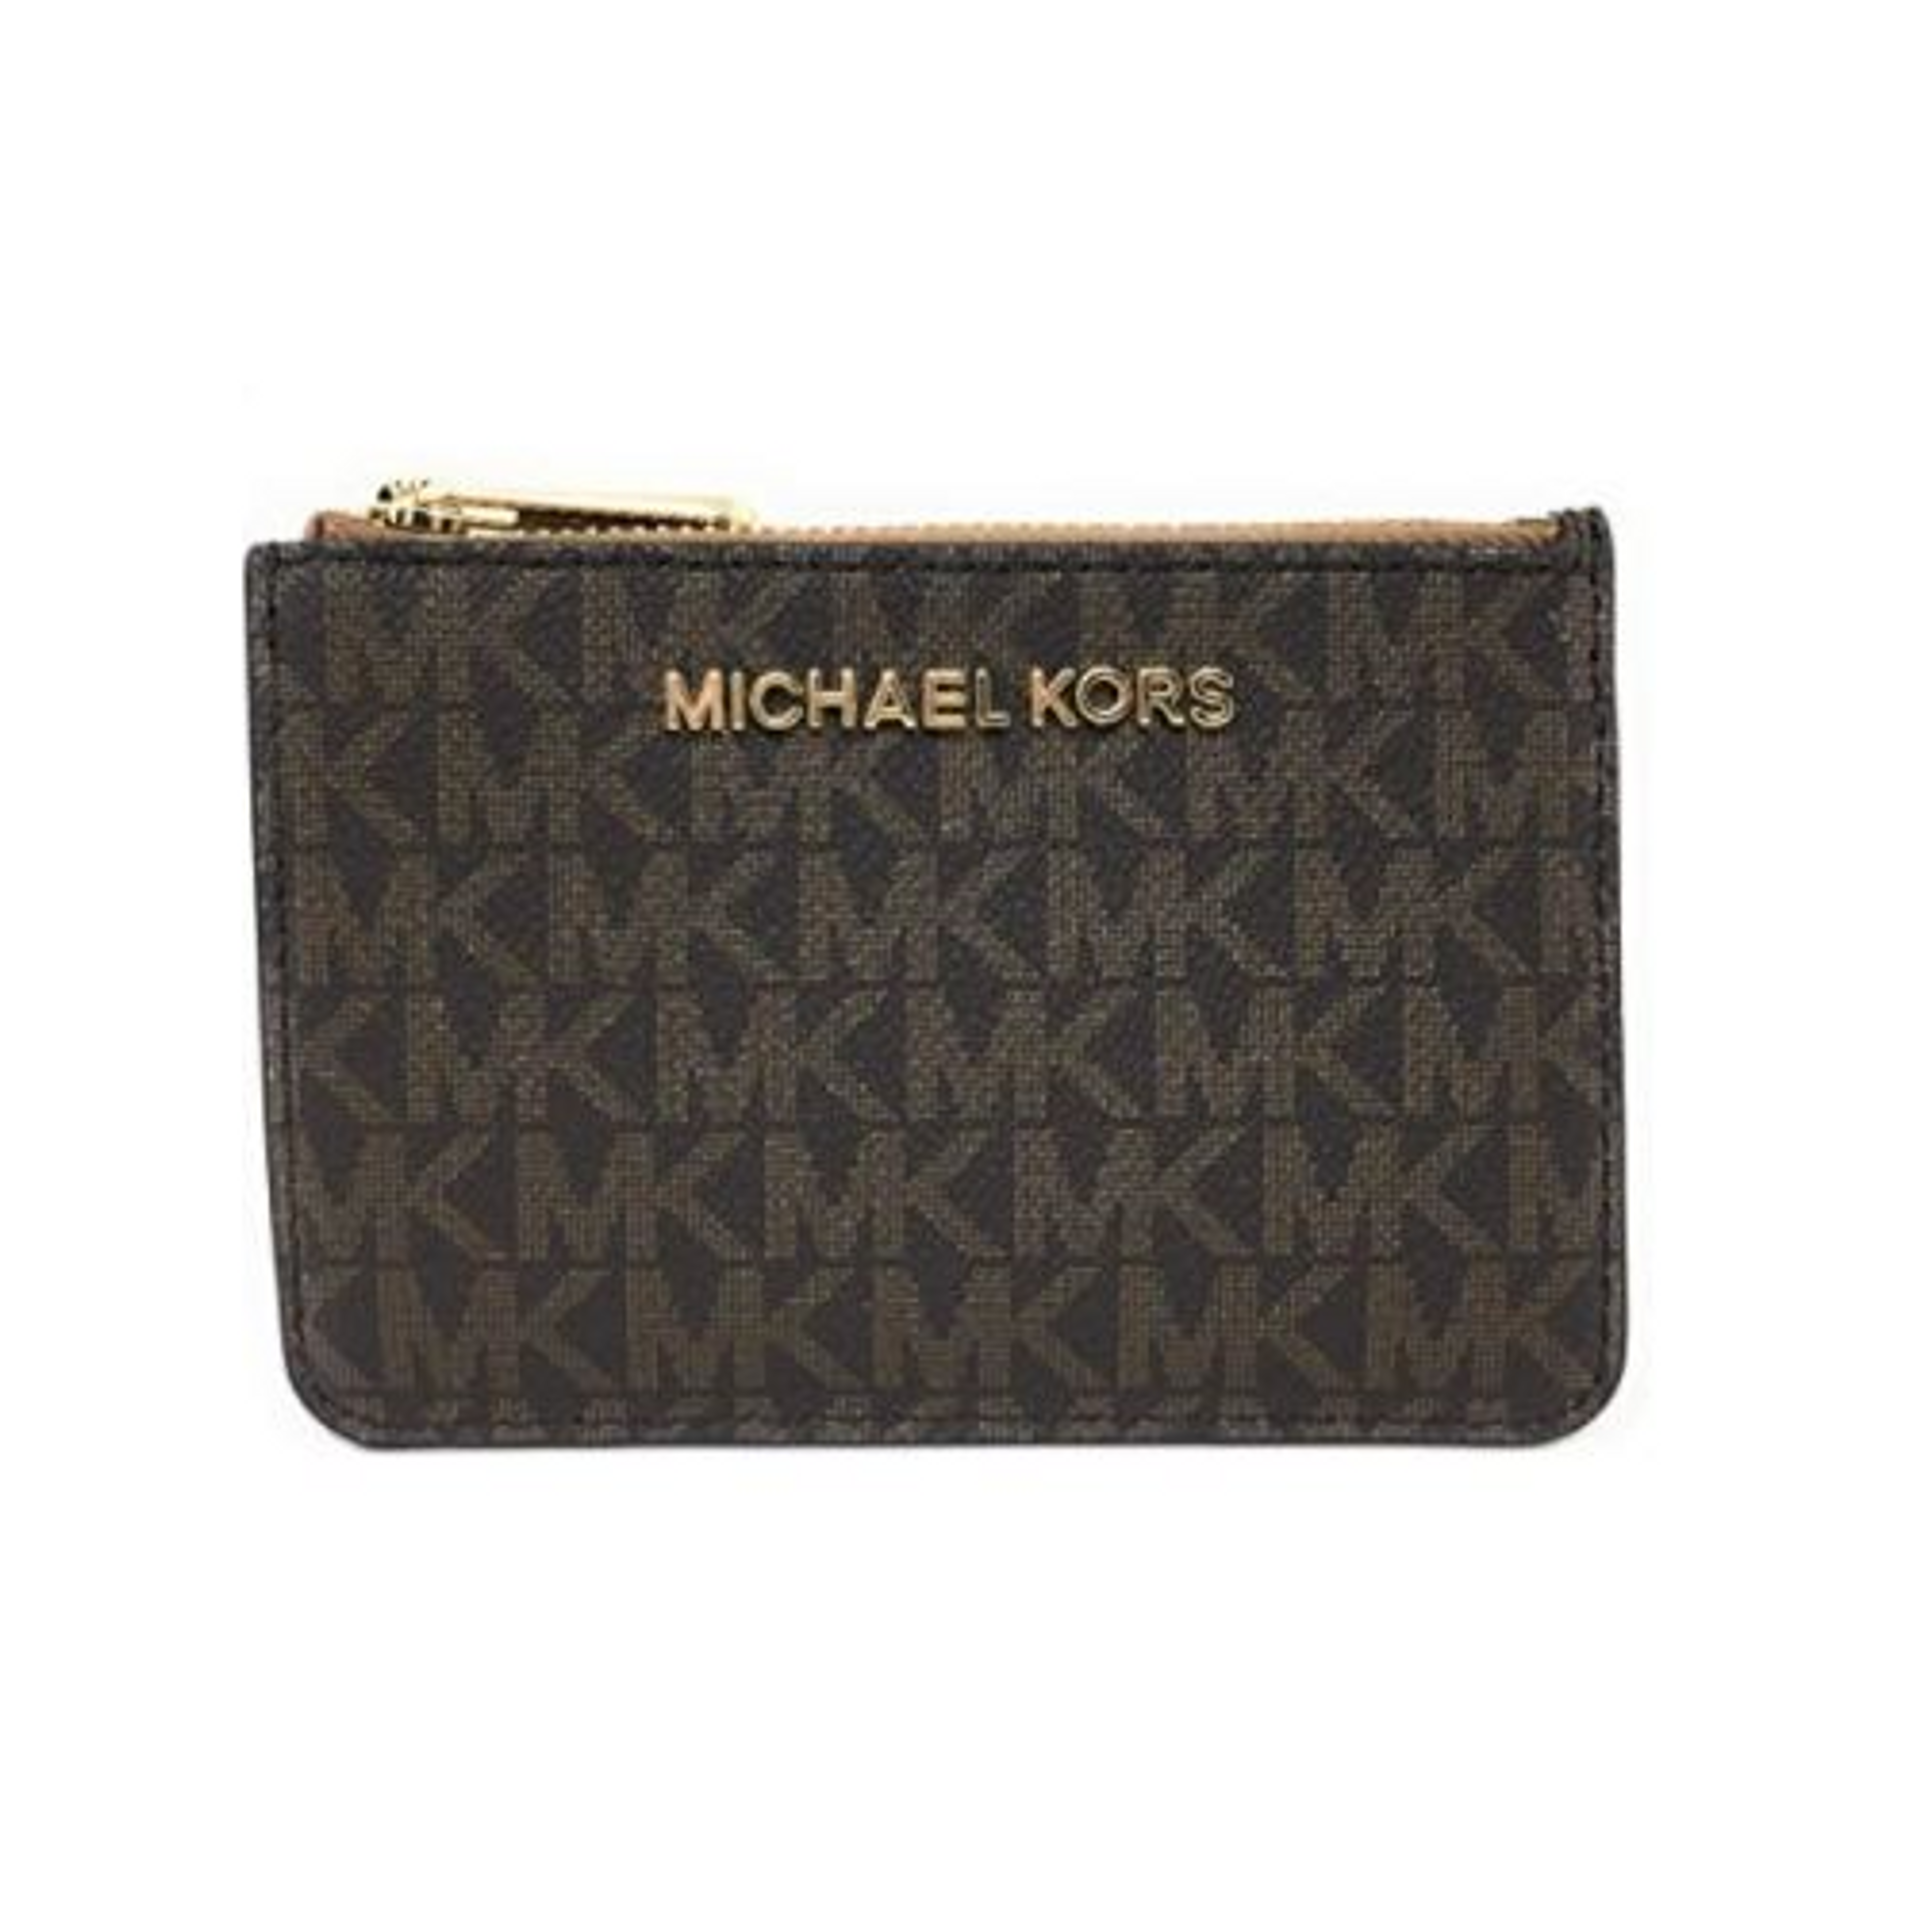 Michael Kors Jet Set Travel Small Top Zip Coin Pouch with ID Holder ...